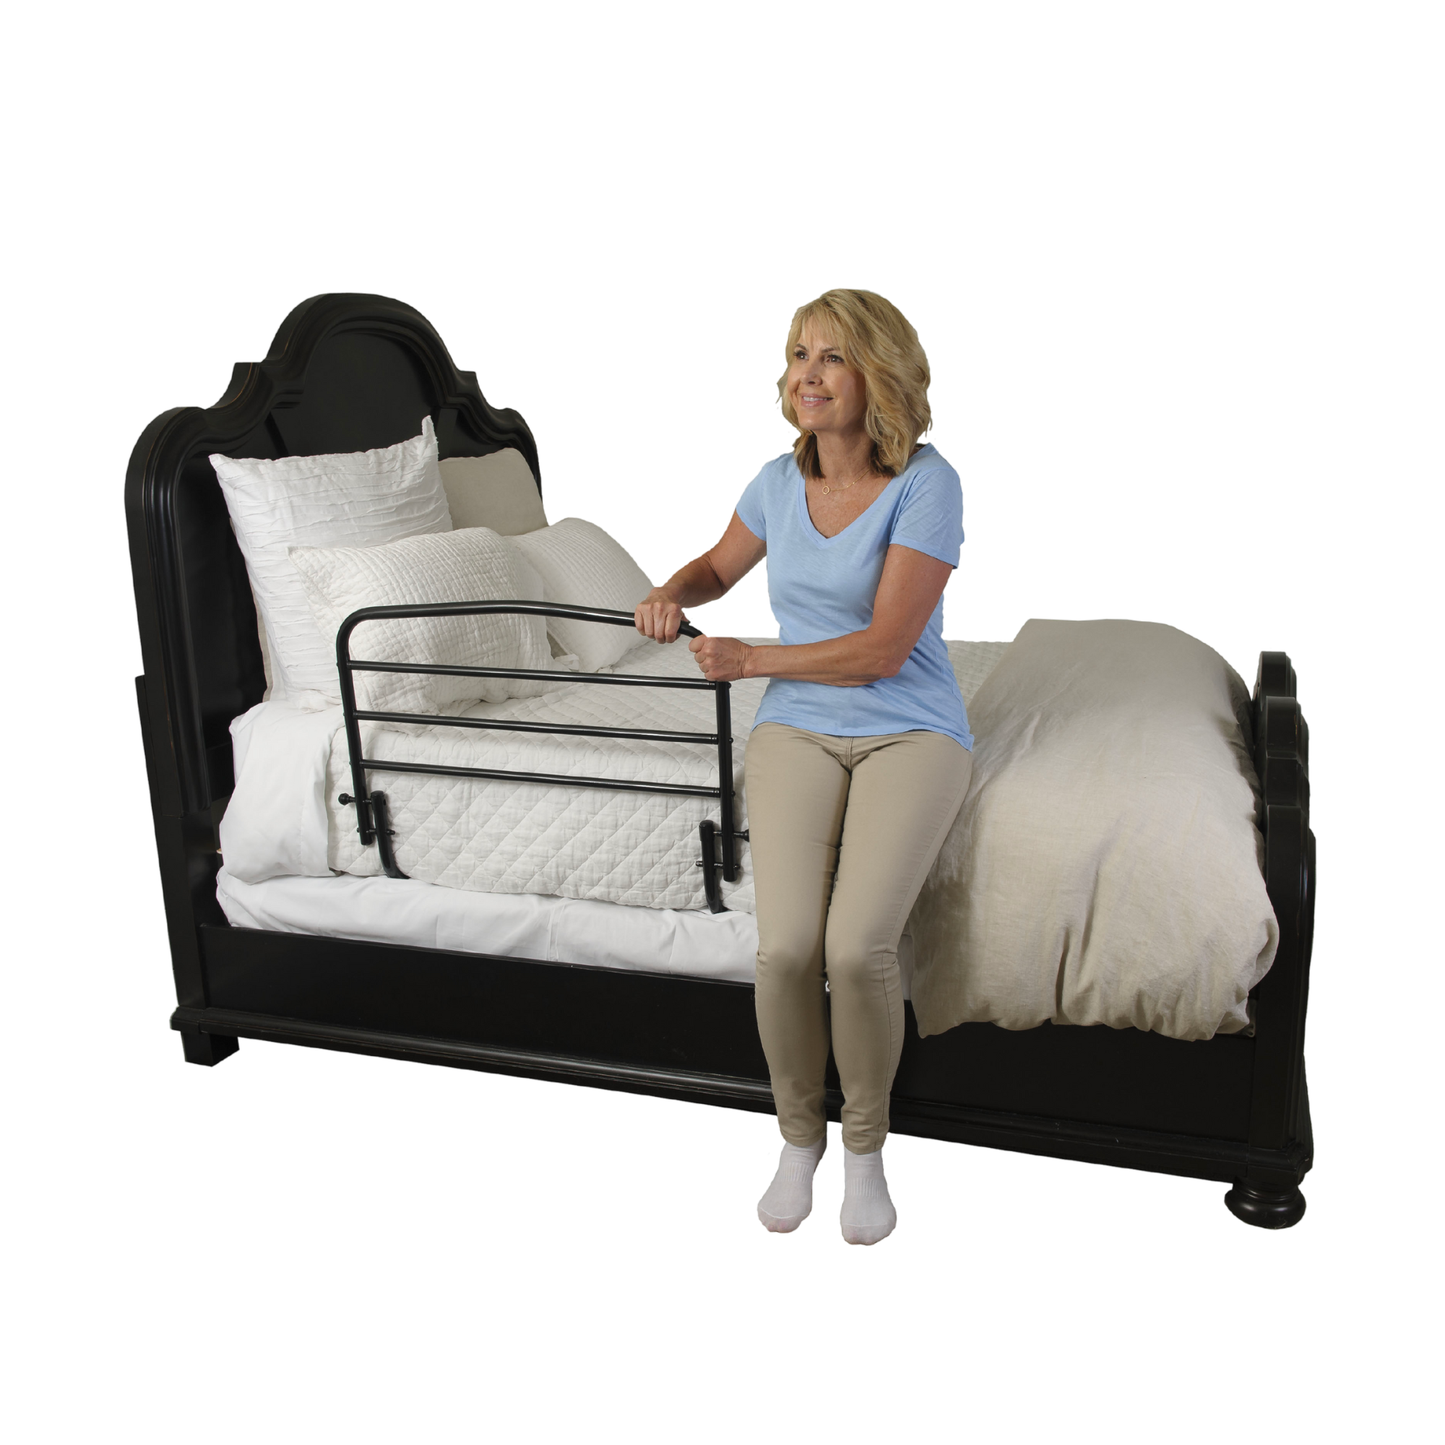 Stander 30" Safety Bed Rail For Fall Prevention